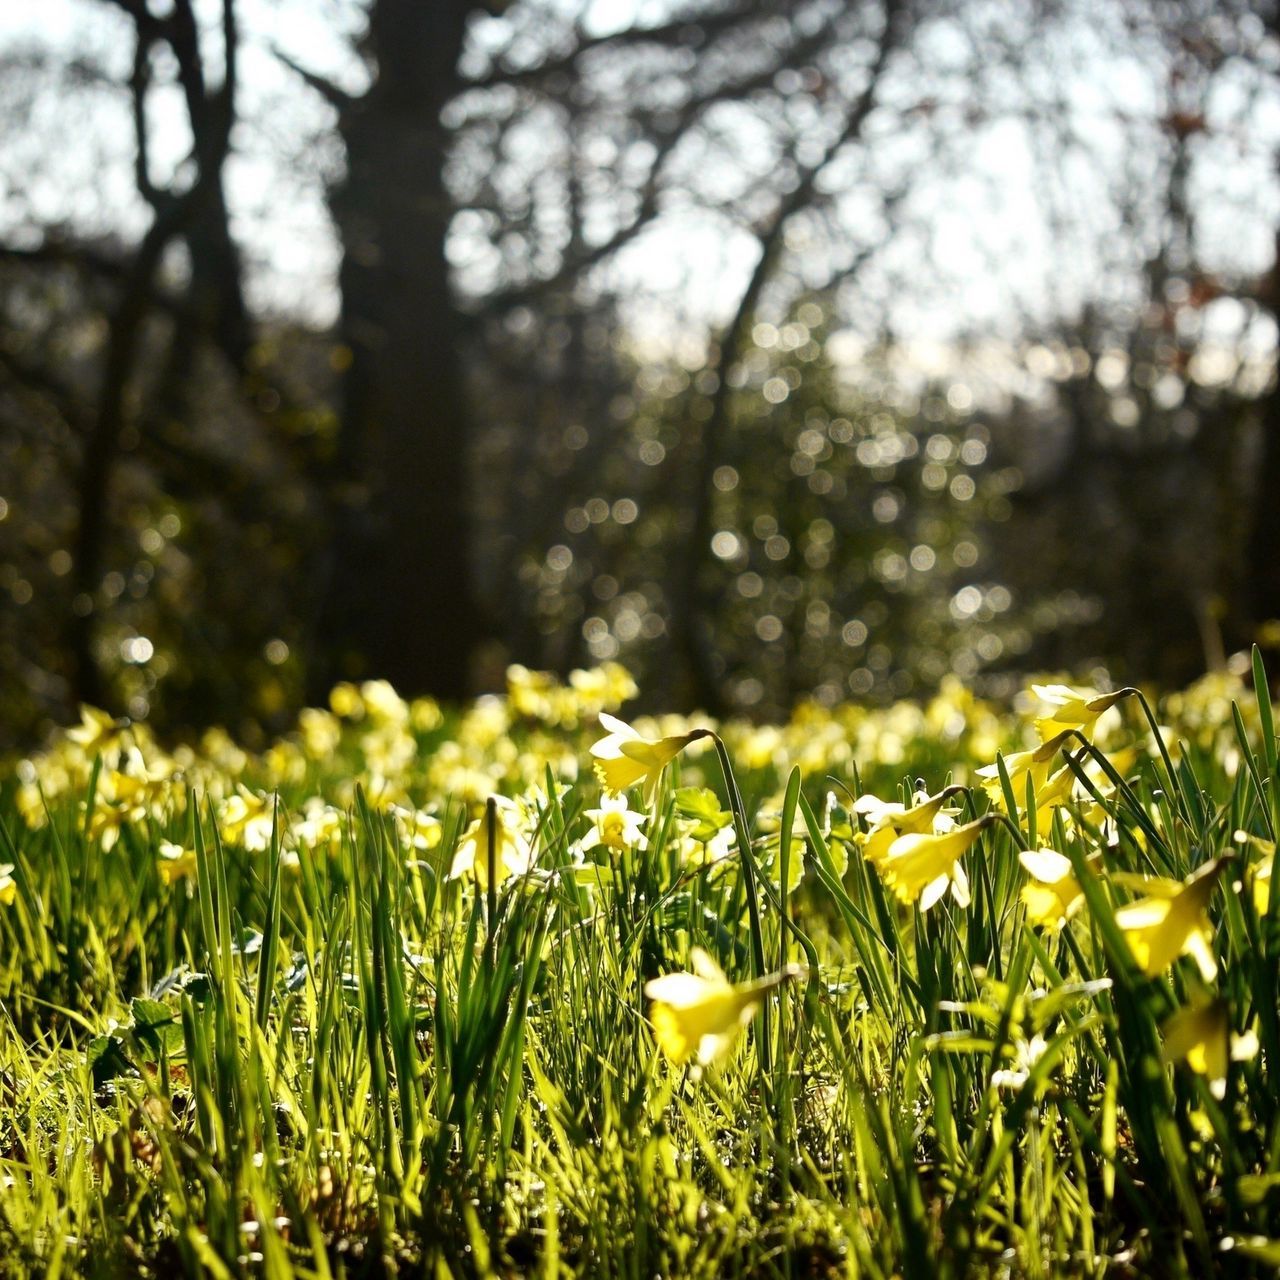 Download wallpaper 1280x1280 daffodils, spring, forest, nature, reflections ipad, ipad ipad mini for parallax HD background